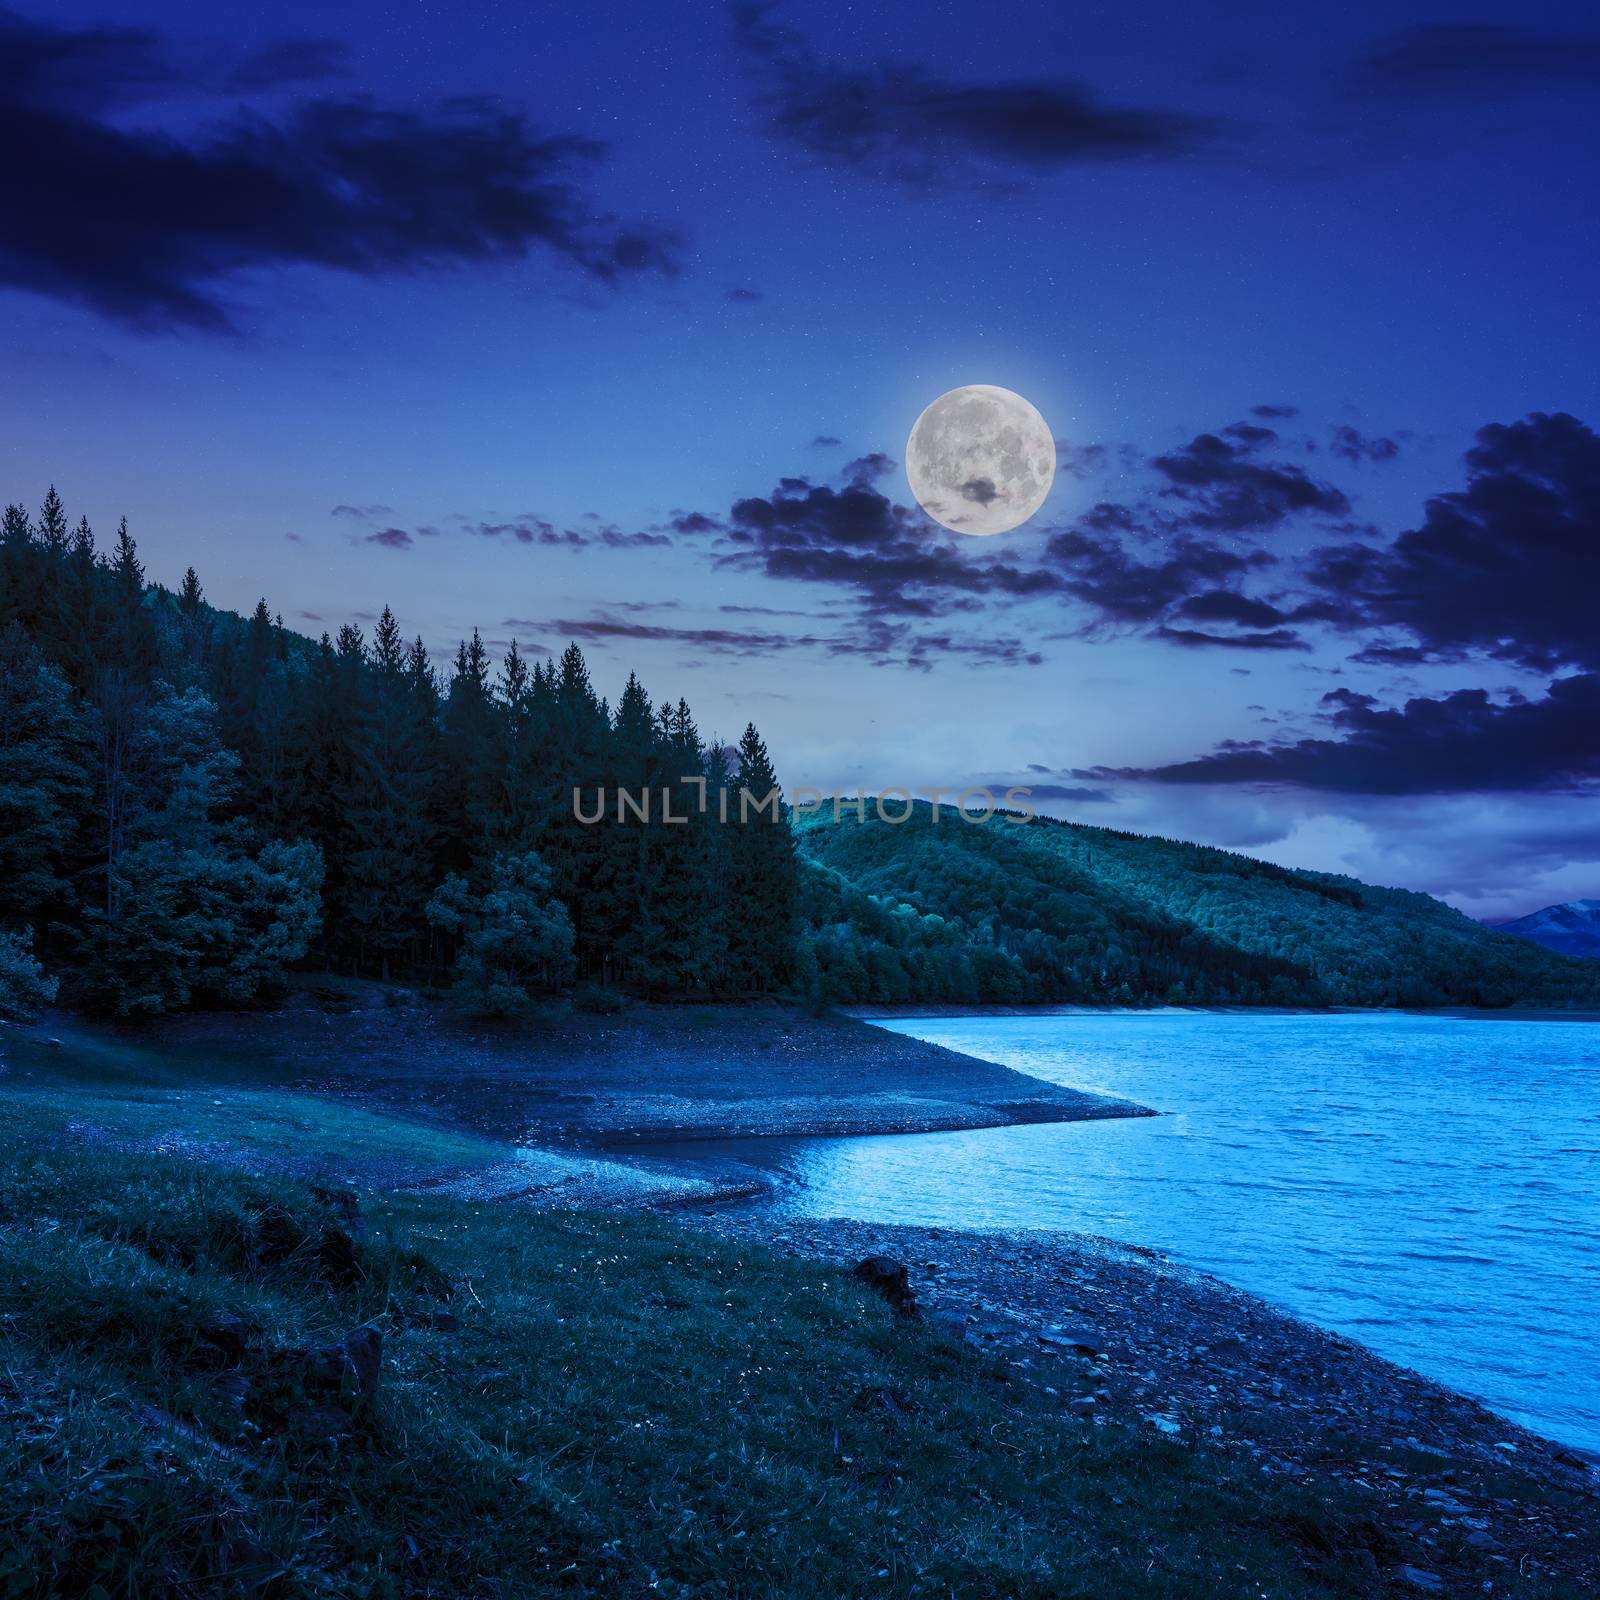 view on lake near the forest with some  pine treesat night on mountain background in moon light